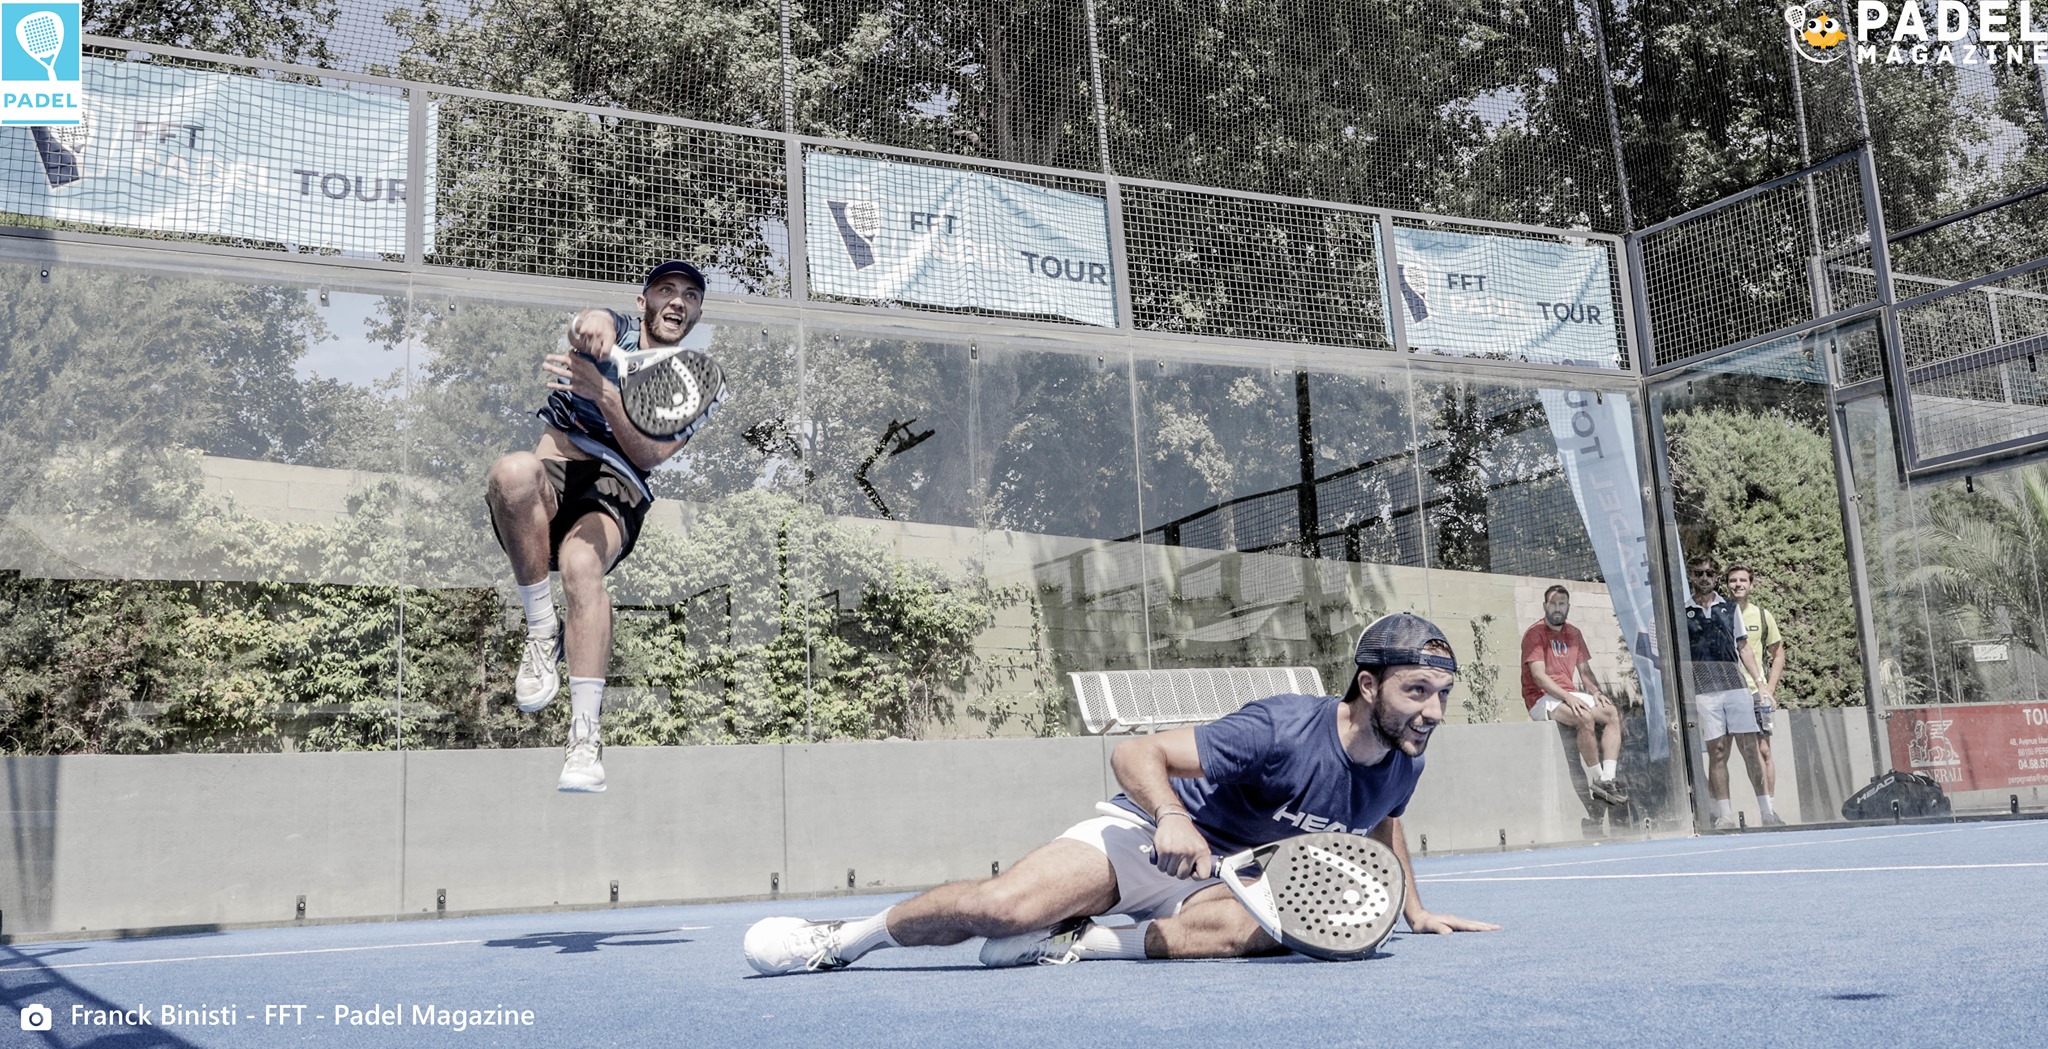 FFT Padel Tour P2000 Perpignan: only two days left to register!